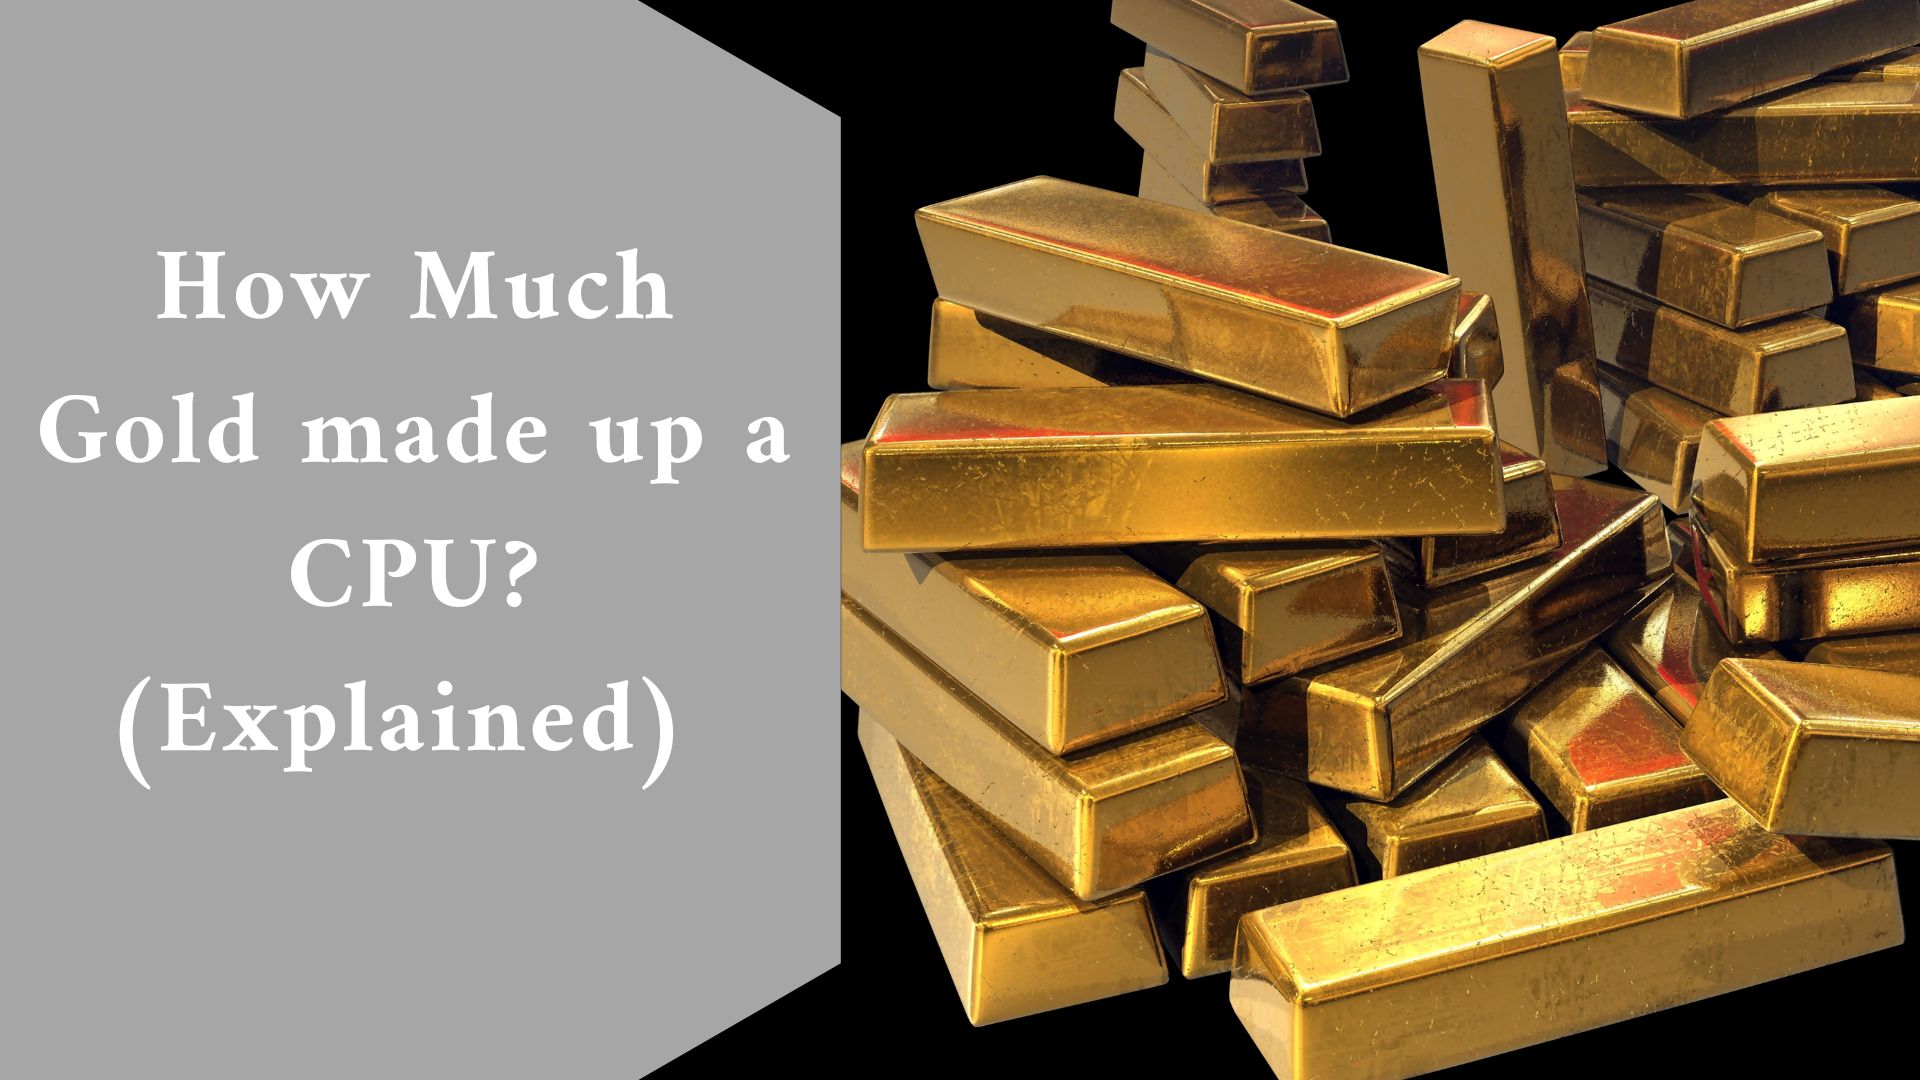 How Much Gold made up a CPU? (Explained)